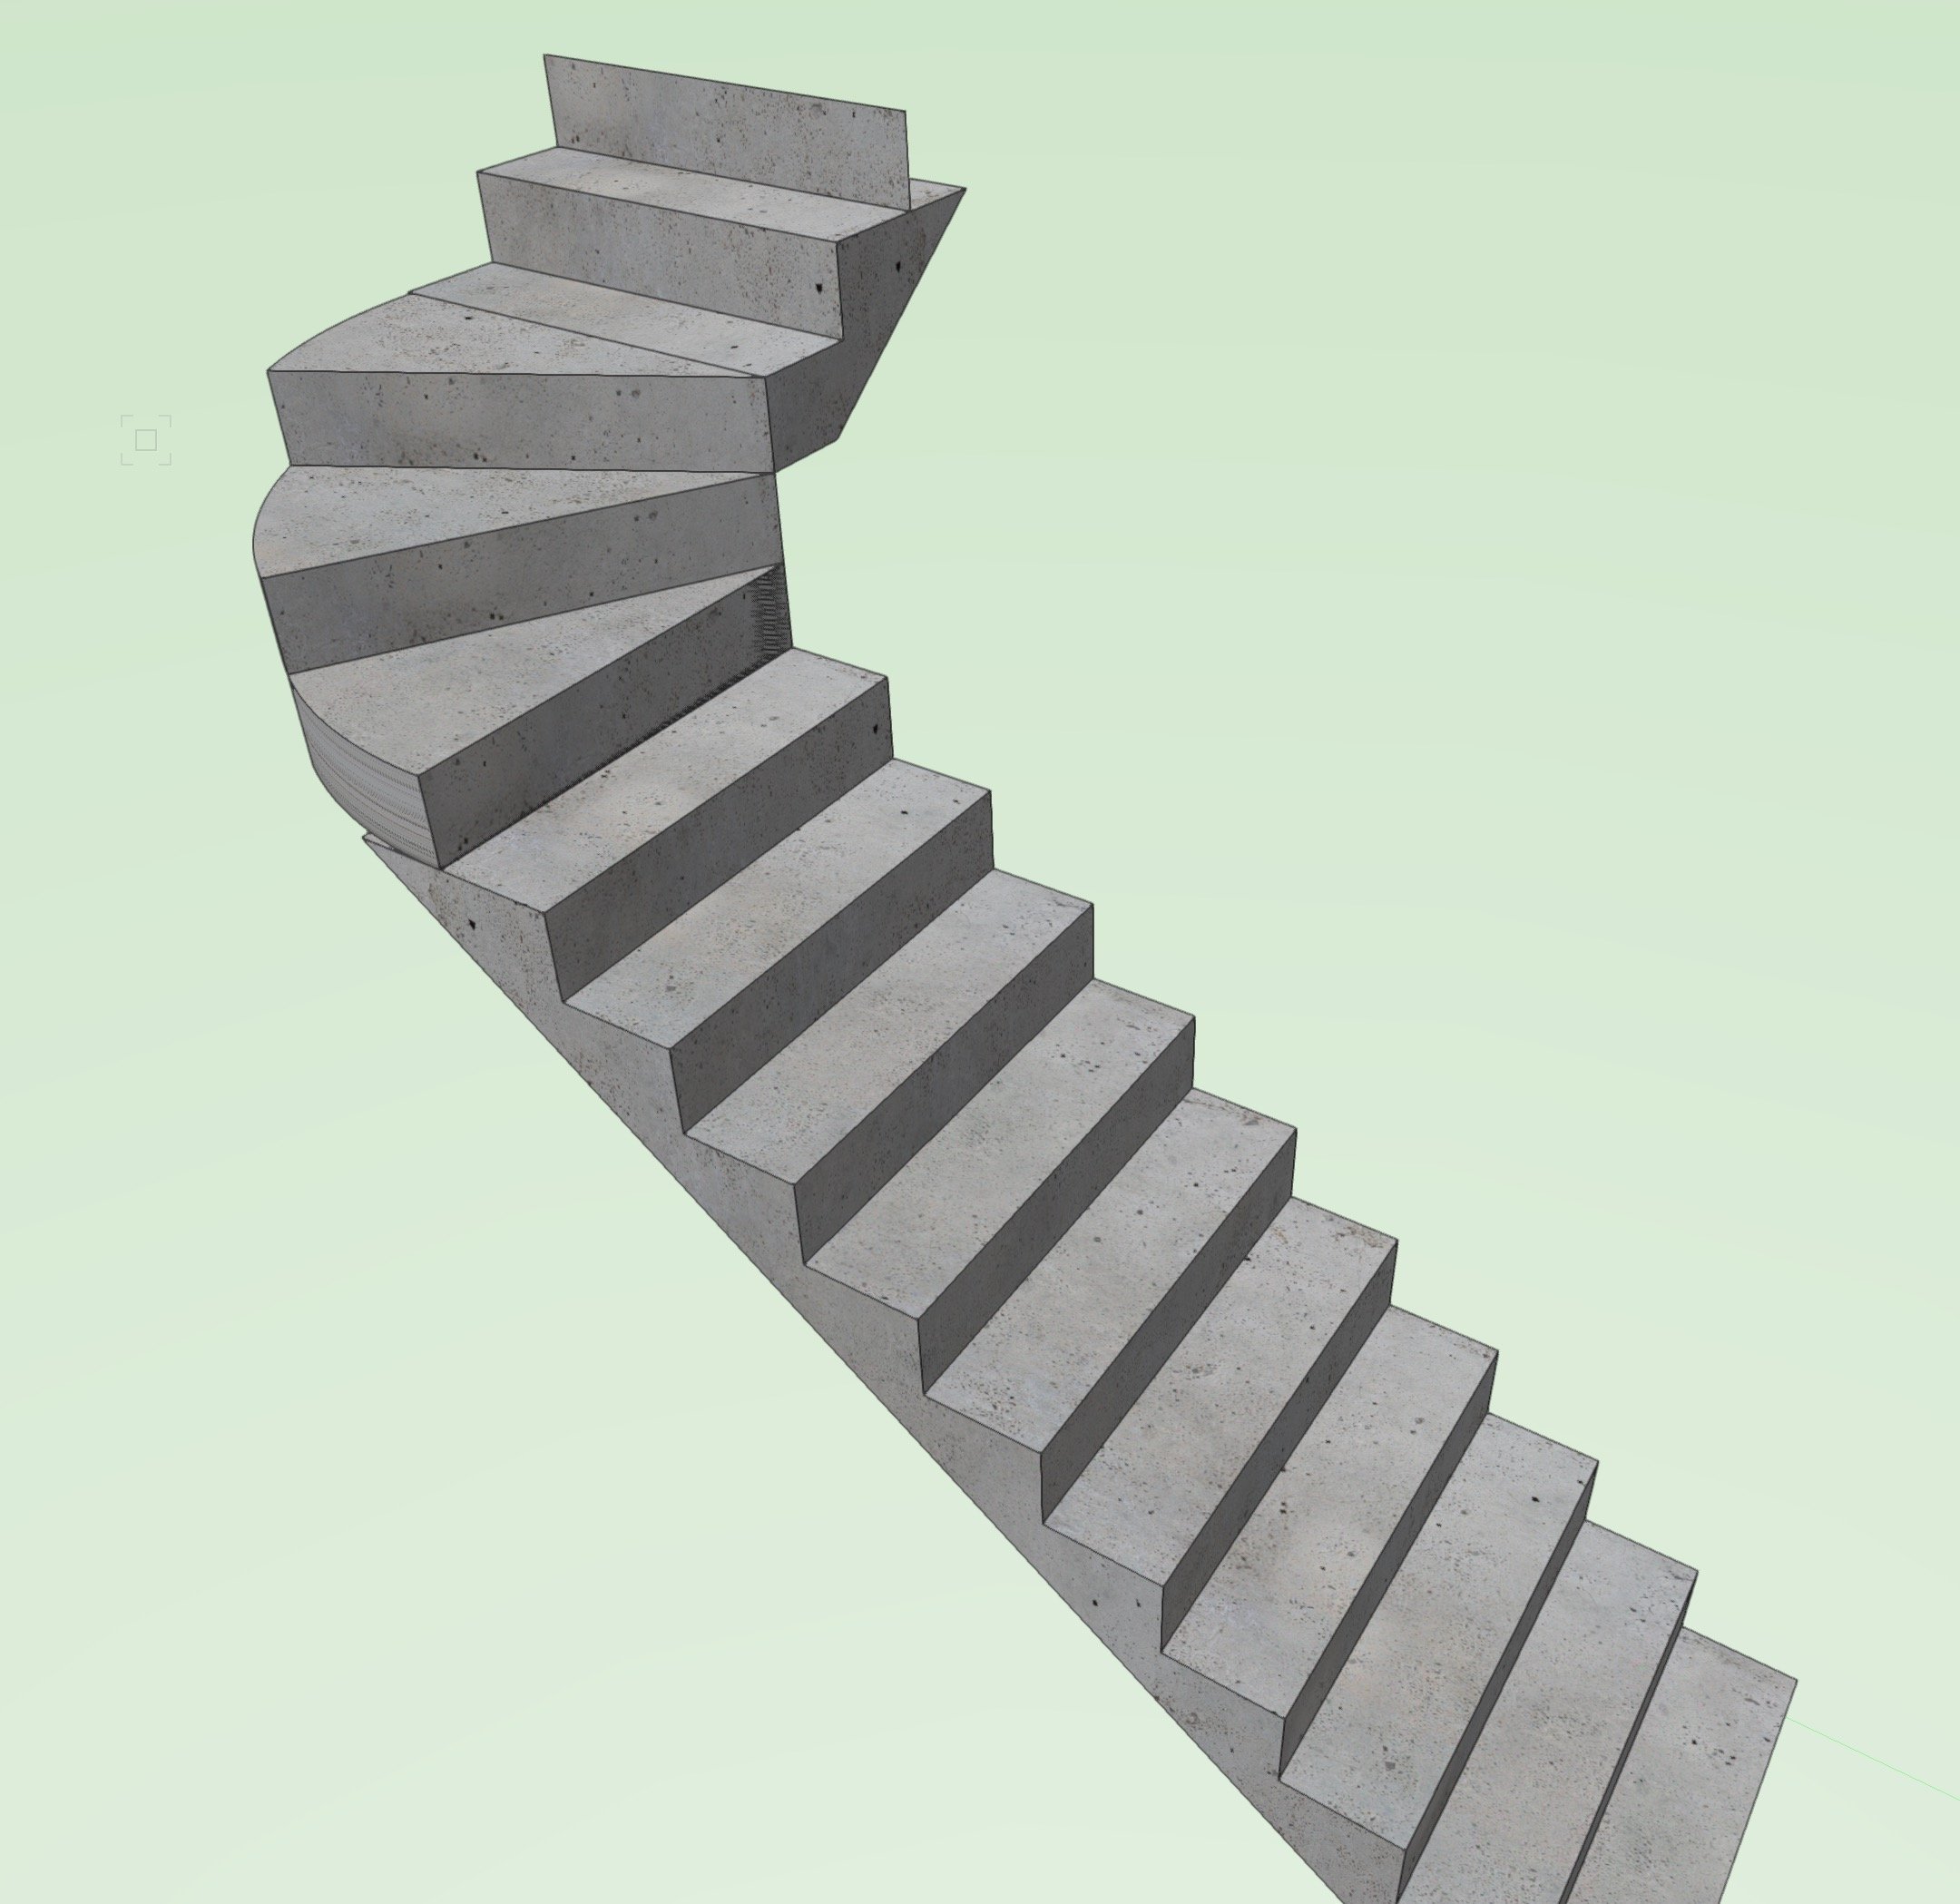 Online Course: Revit Stairs Workshop from LinkedIn Learning | Class Central